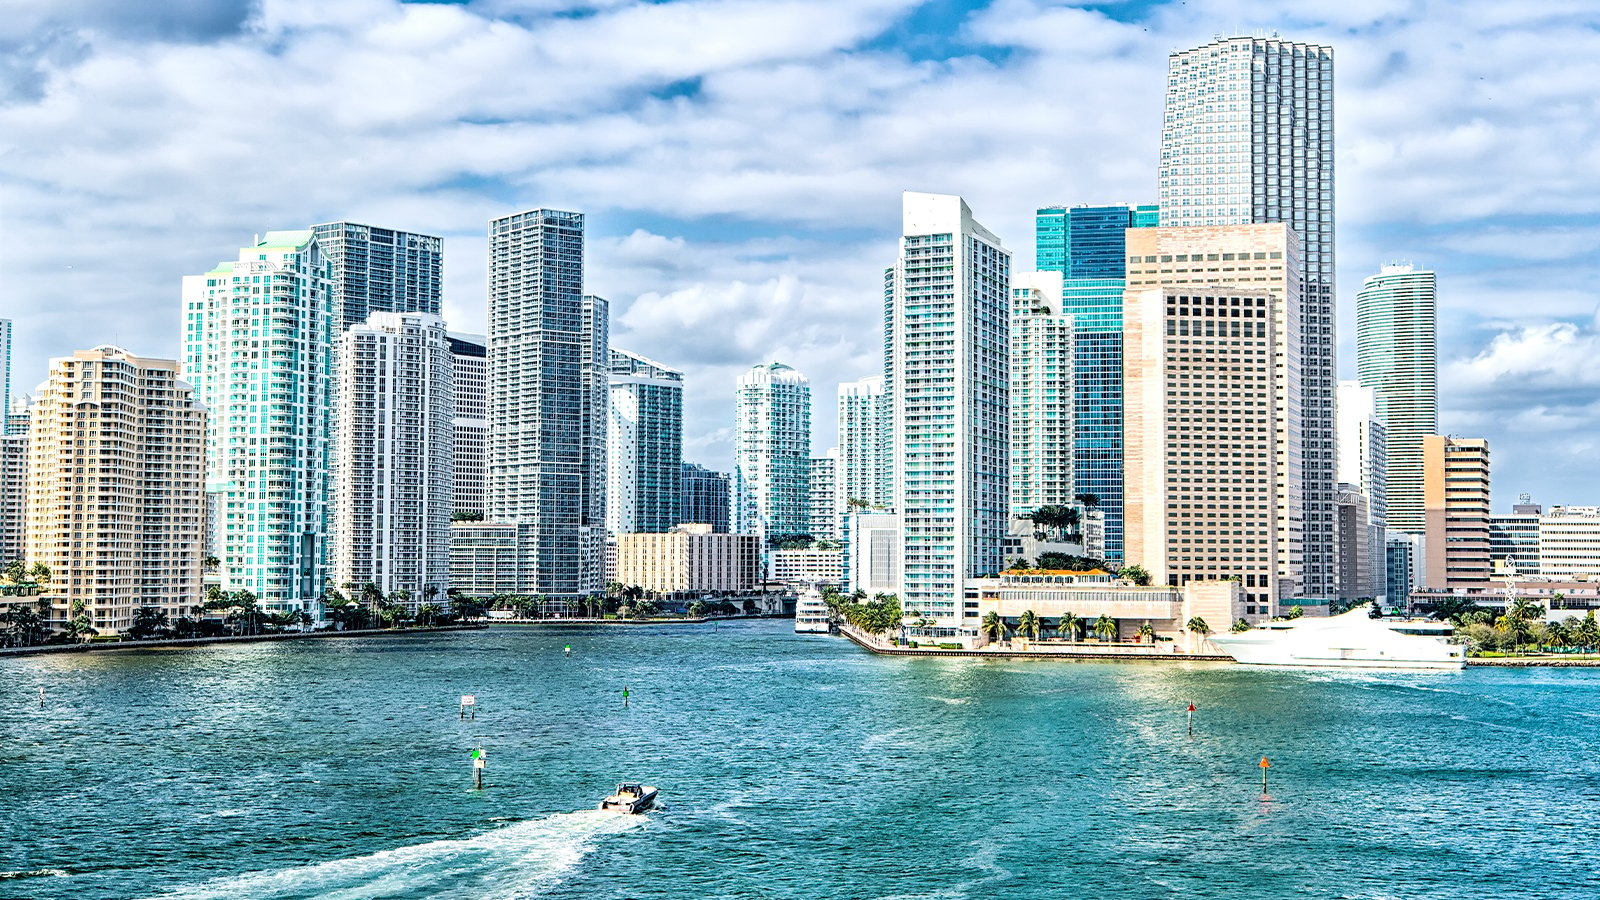 The Miami skyline with a speed boat driving in the lower foreground.